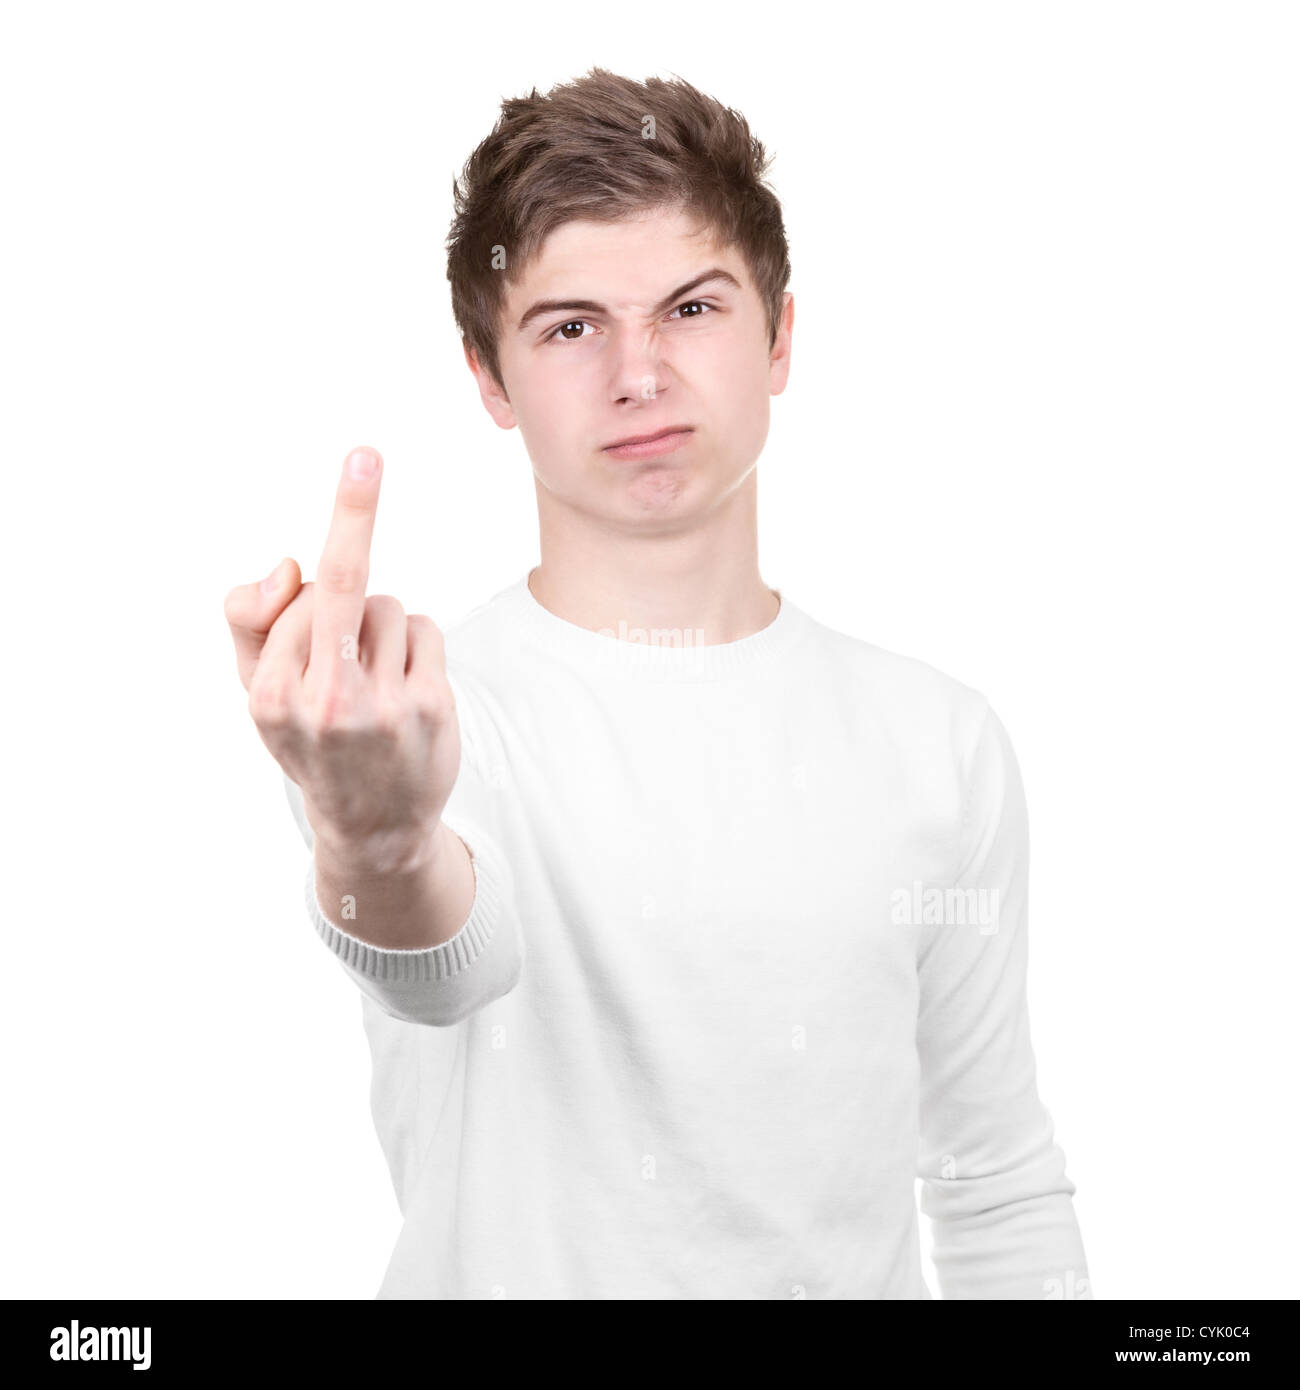 Angry teenager shows rude gesture on a white background Stock Photo